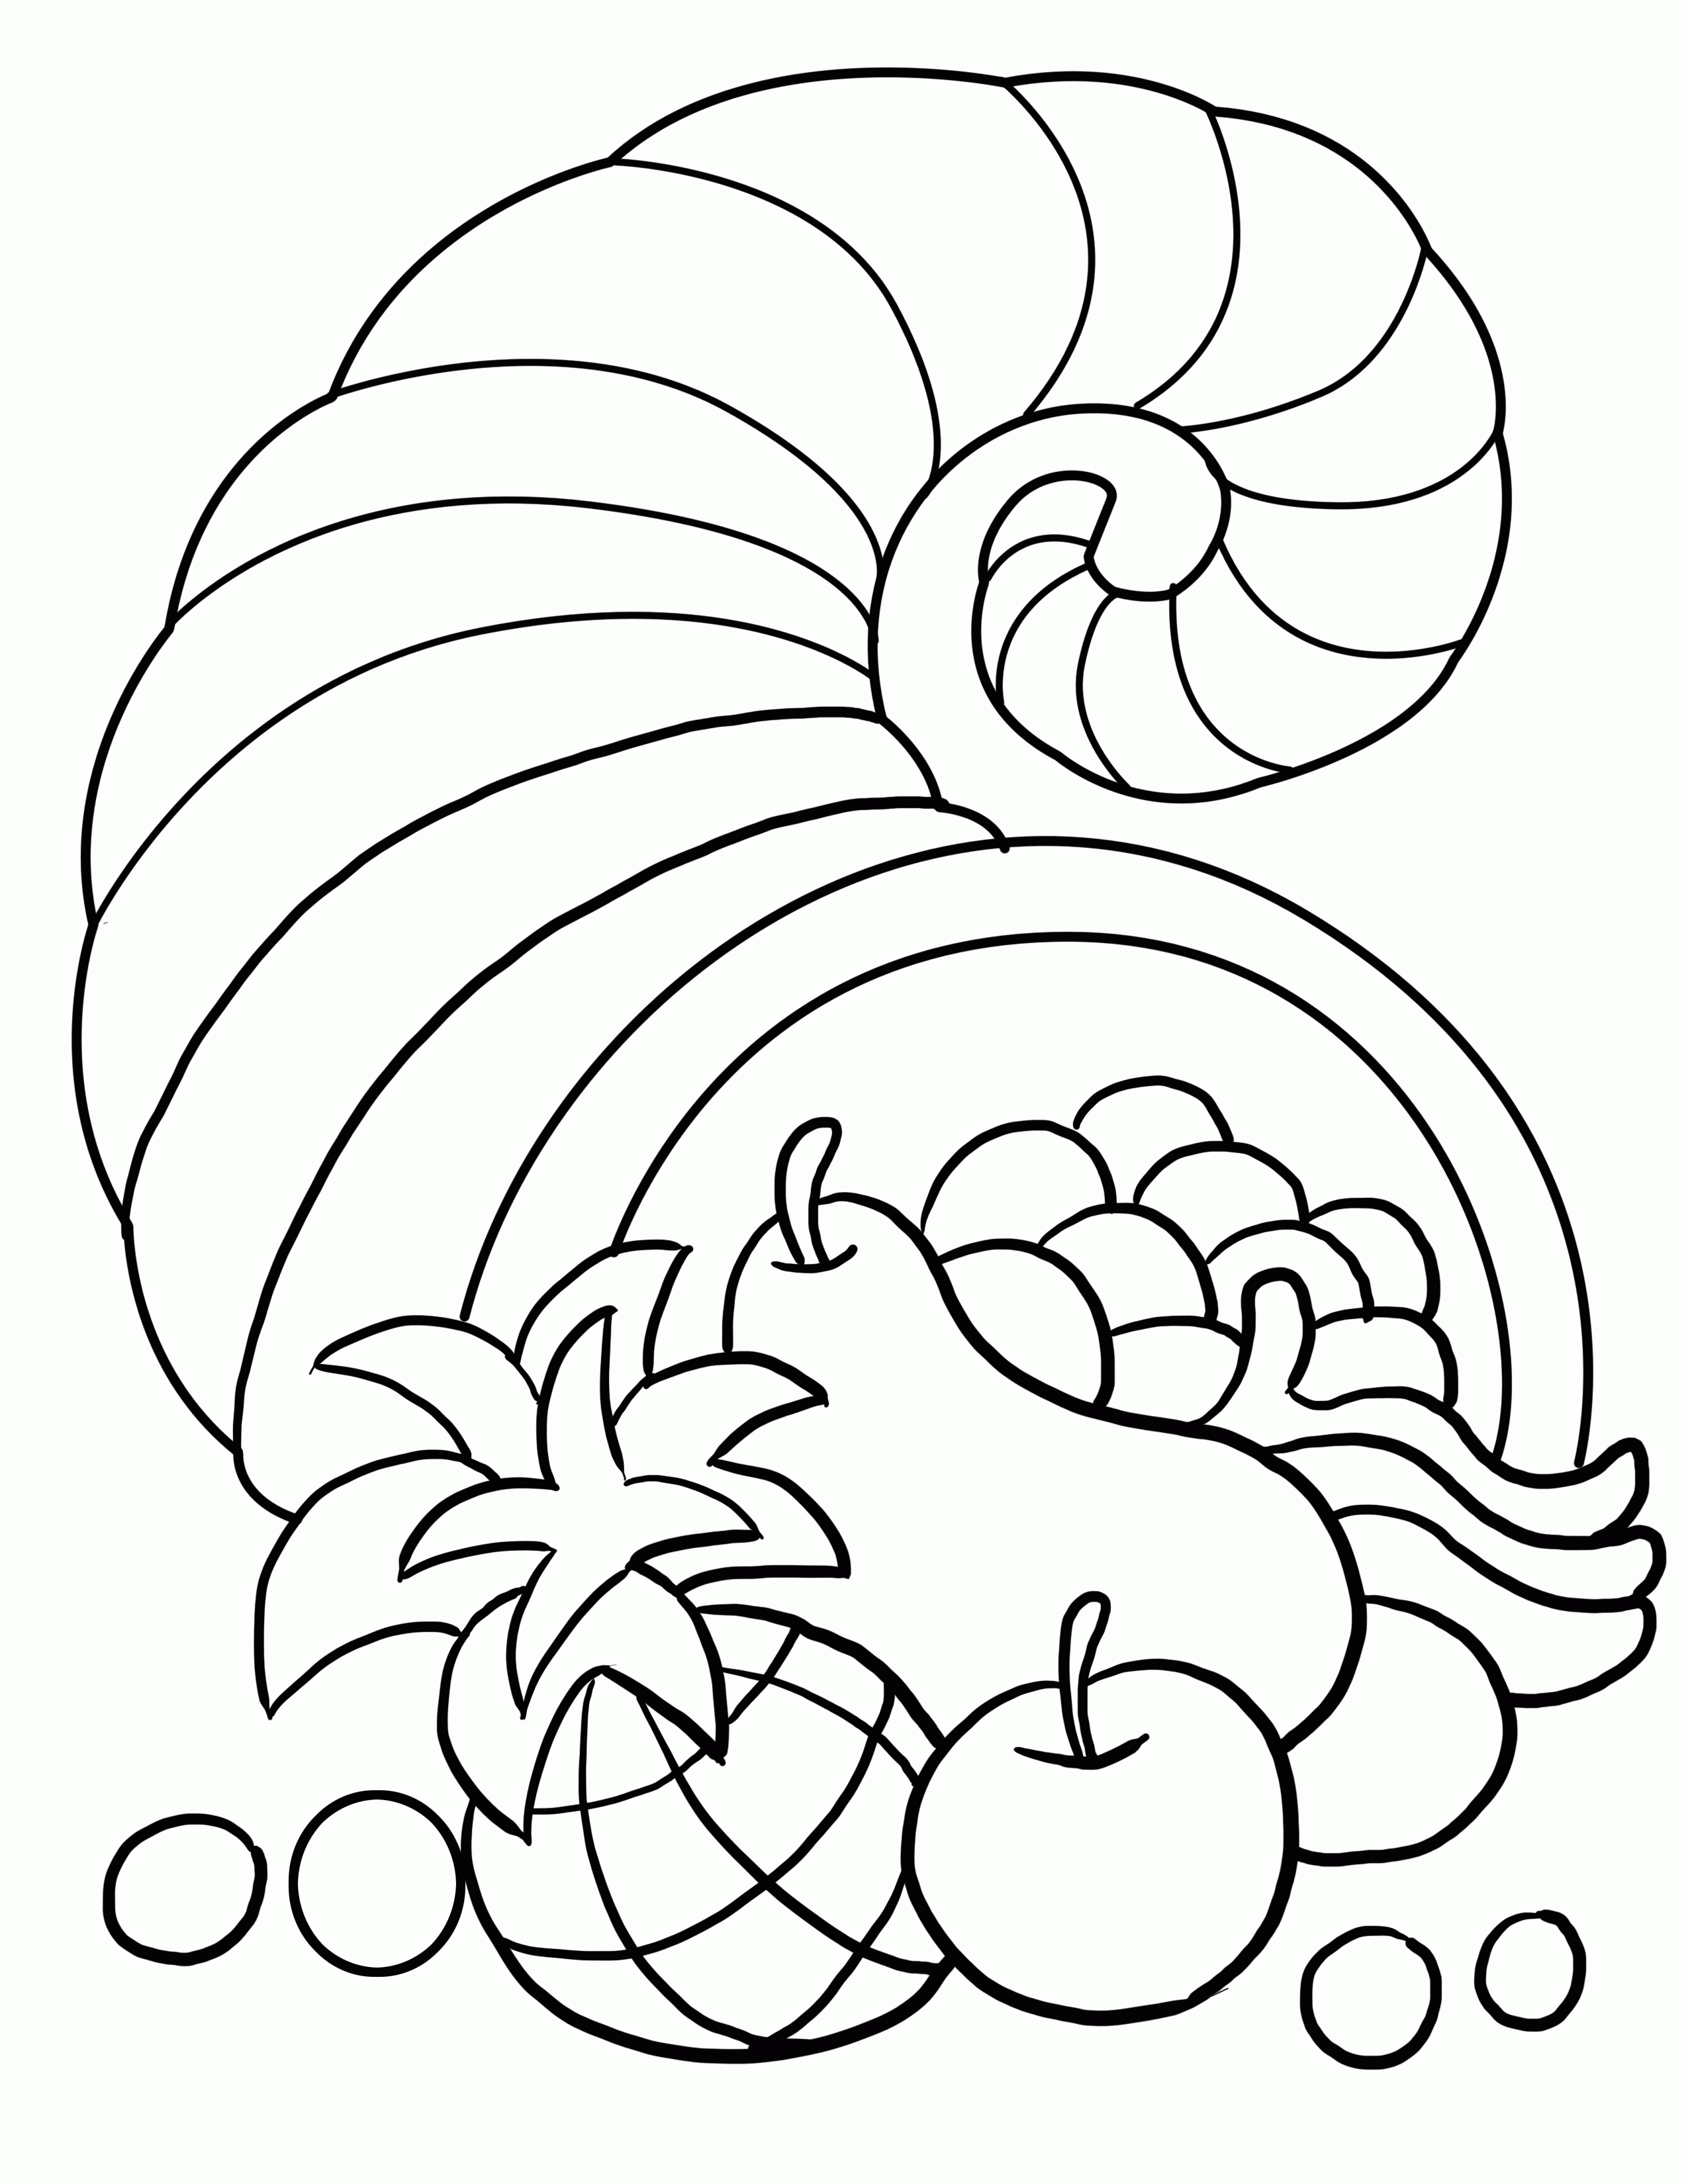 Printable Thanksgiving Coloring Pages | Coloring Me